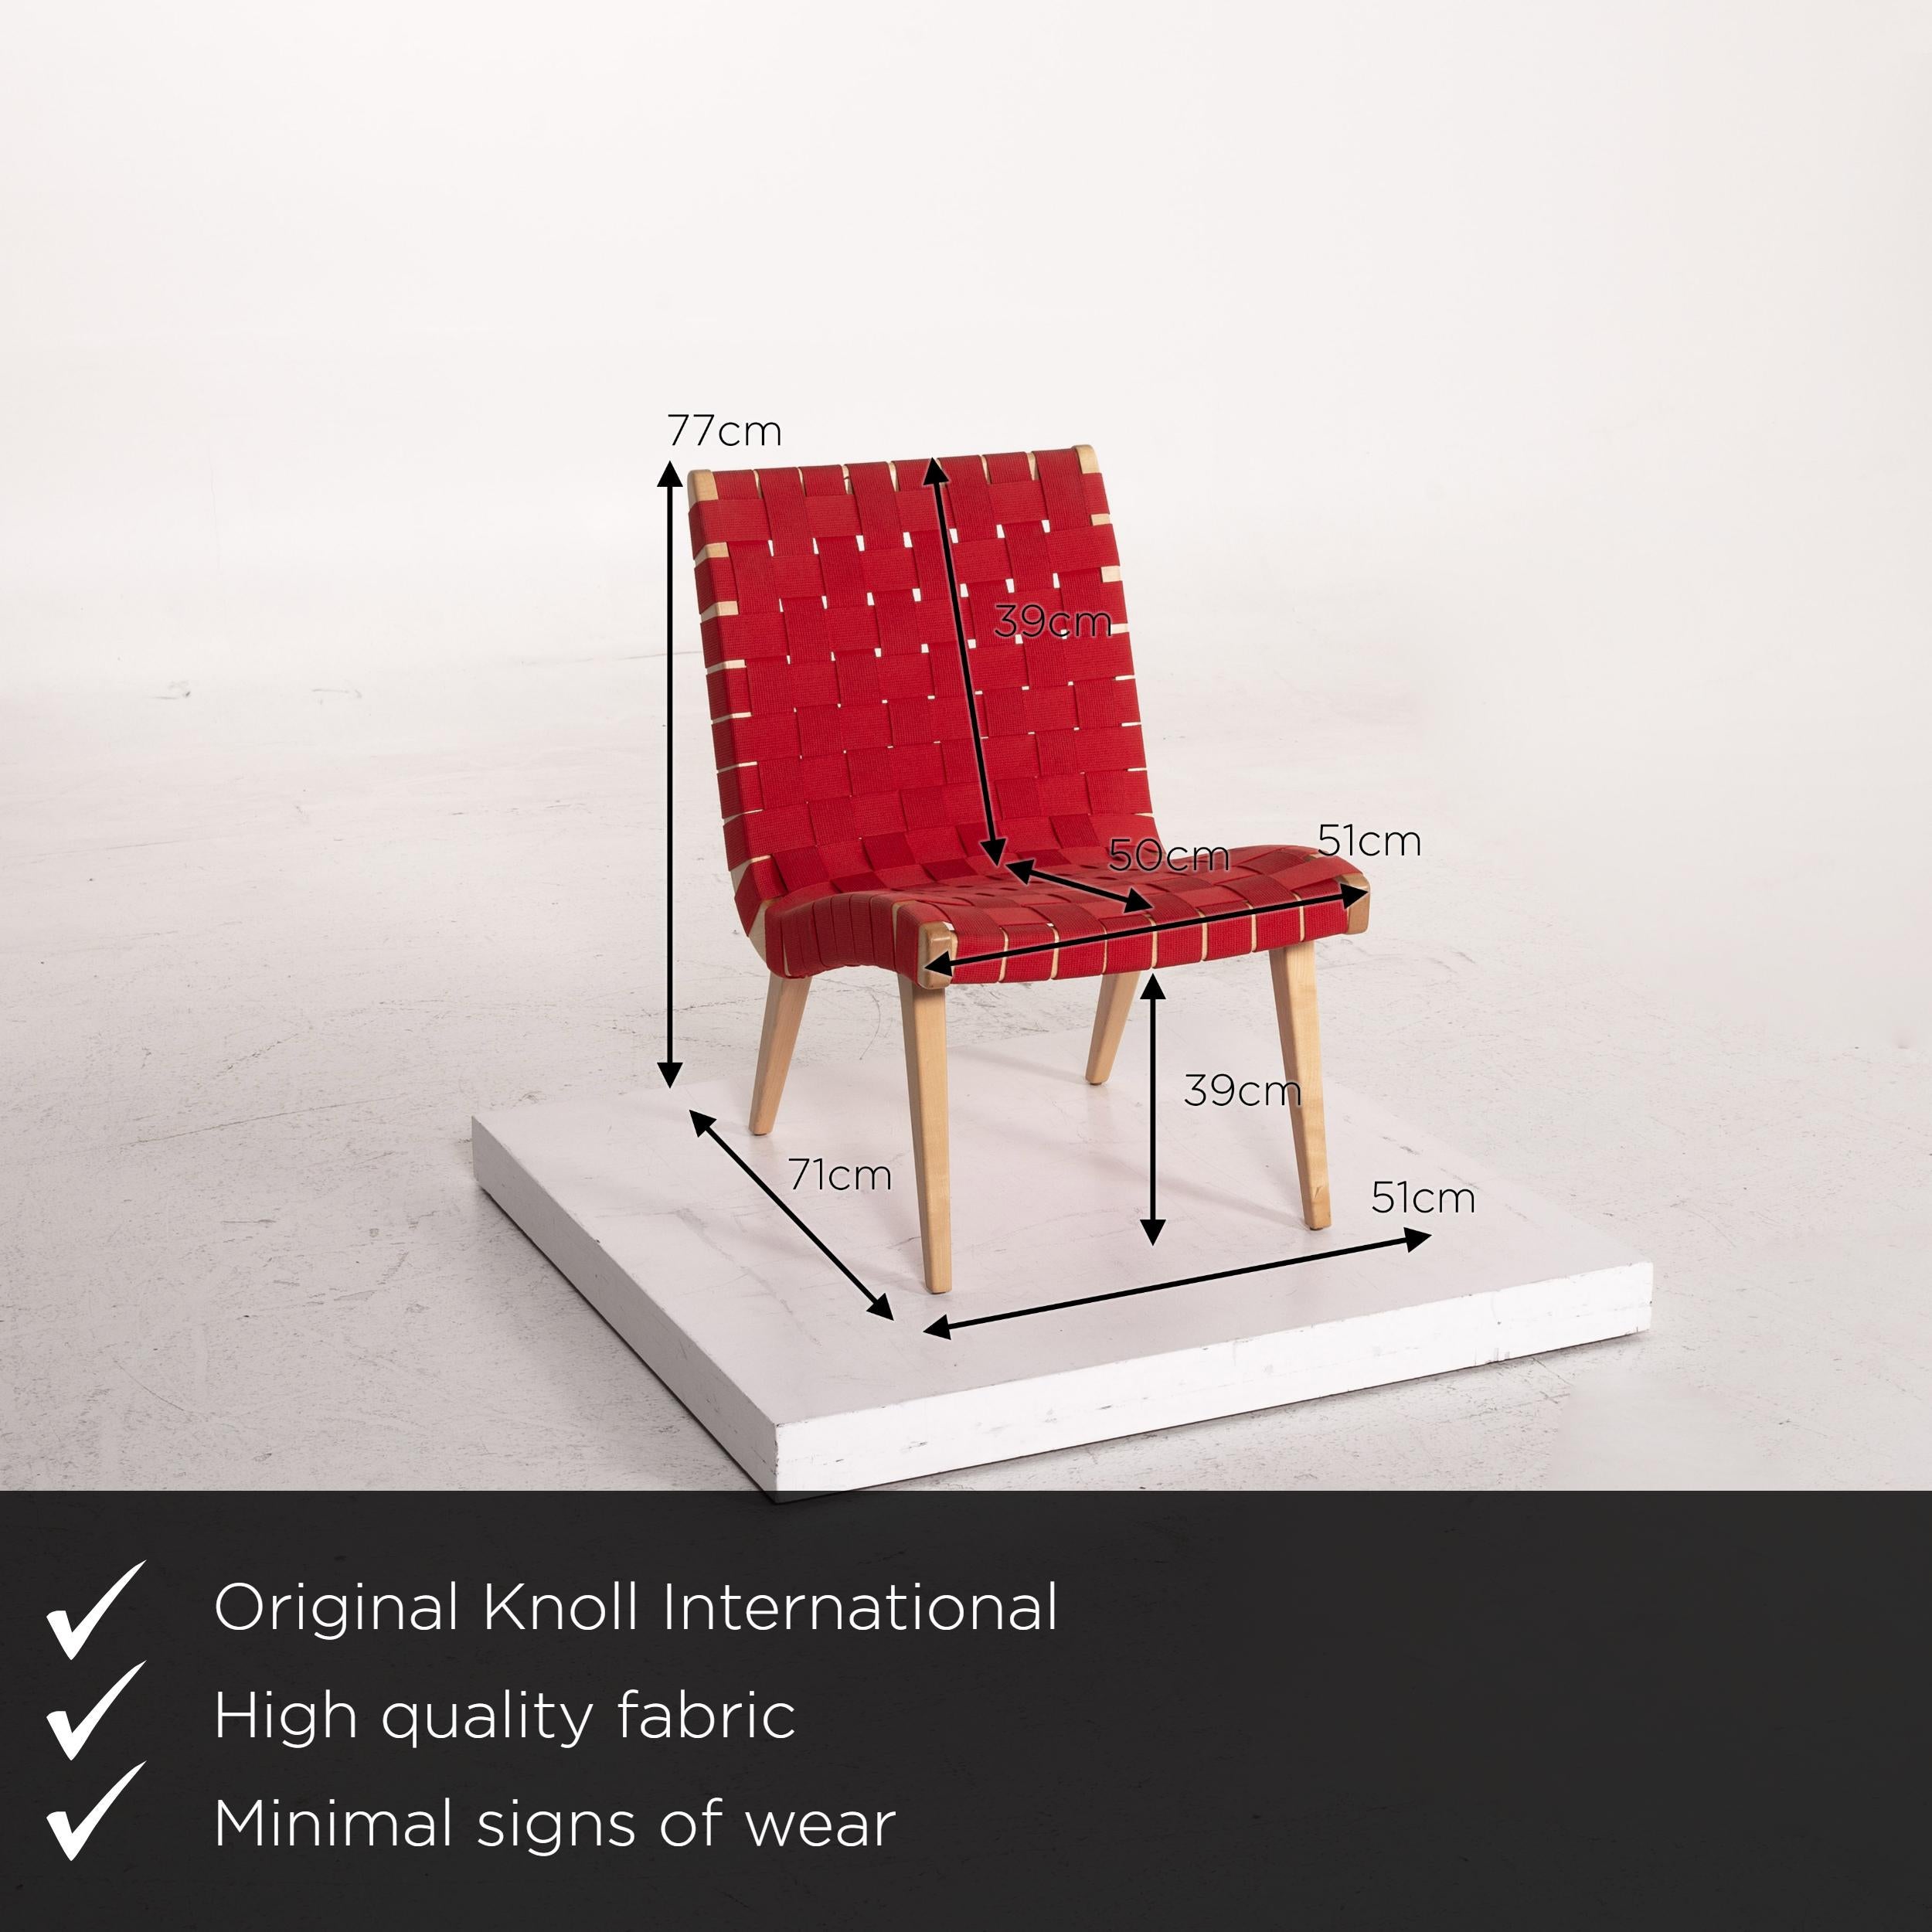 We present to you a Knoll International Risom set fabric black 2 armchairs.
  
 

 Product measurements in centimeters:
 

Depth 71
Width 51
Height 77
Seat height 39
Seat depth 50
Seat width 51
Back height 39.
  